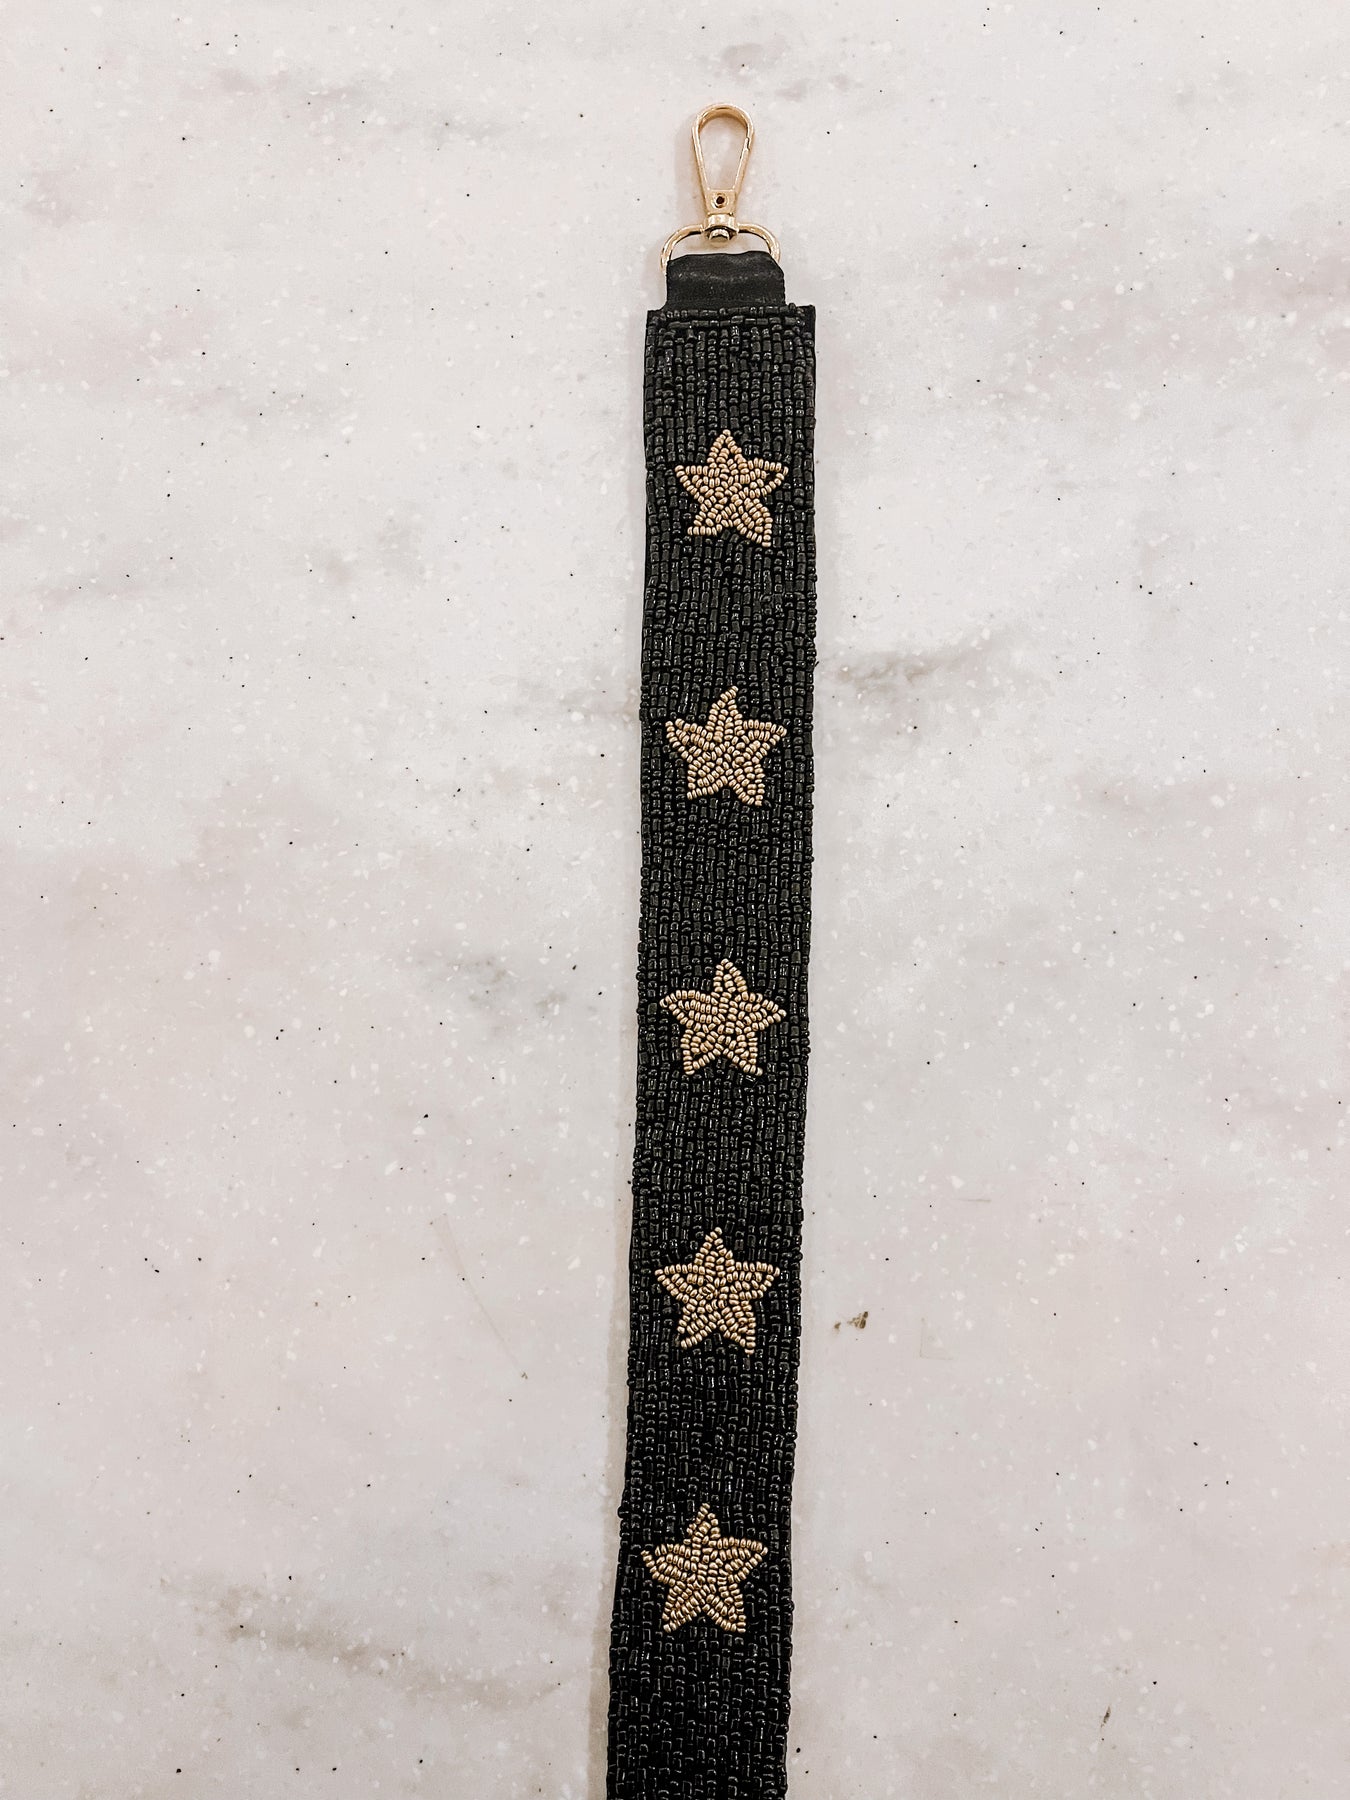 Red & Black Star Beaded Purse Strap